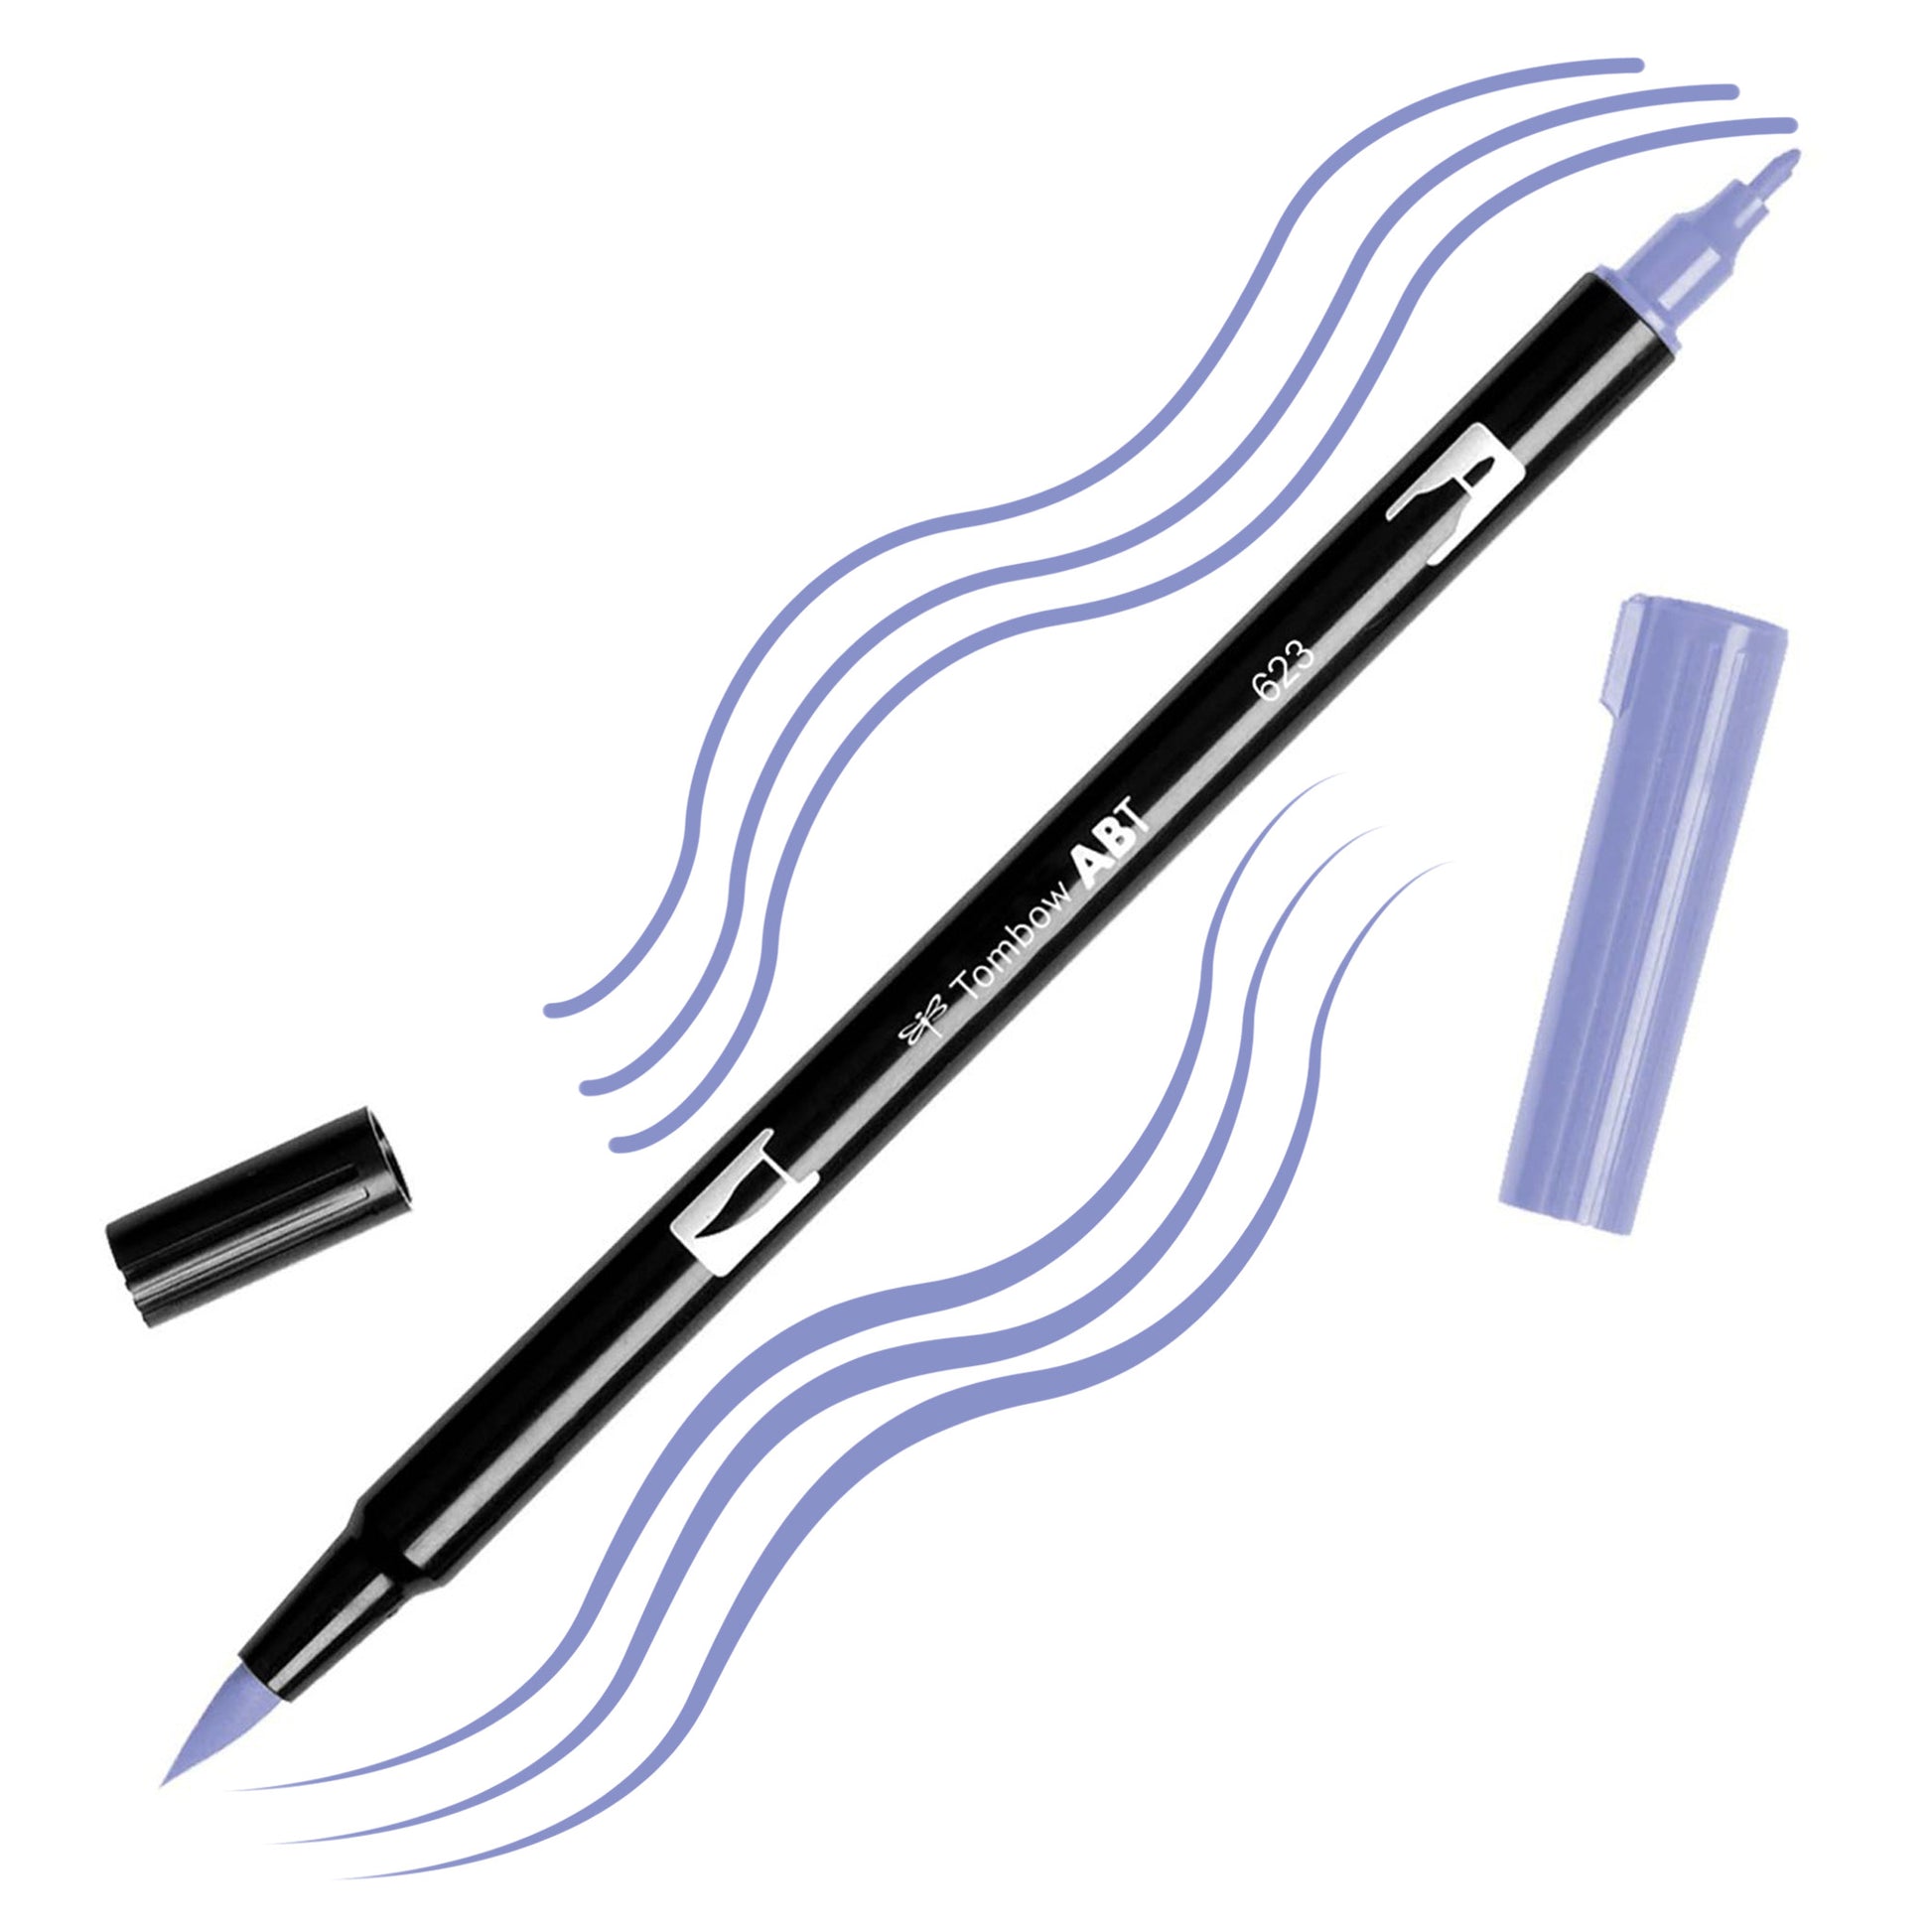 Purple Sage Tombow double-headed brush-pen with a flexible nylon fiber brush tip and a fine tip against a white background with Purple Sage strokes